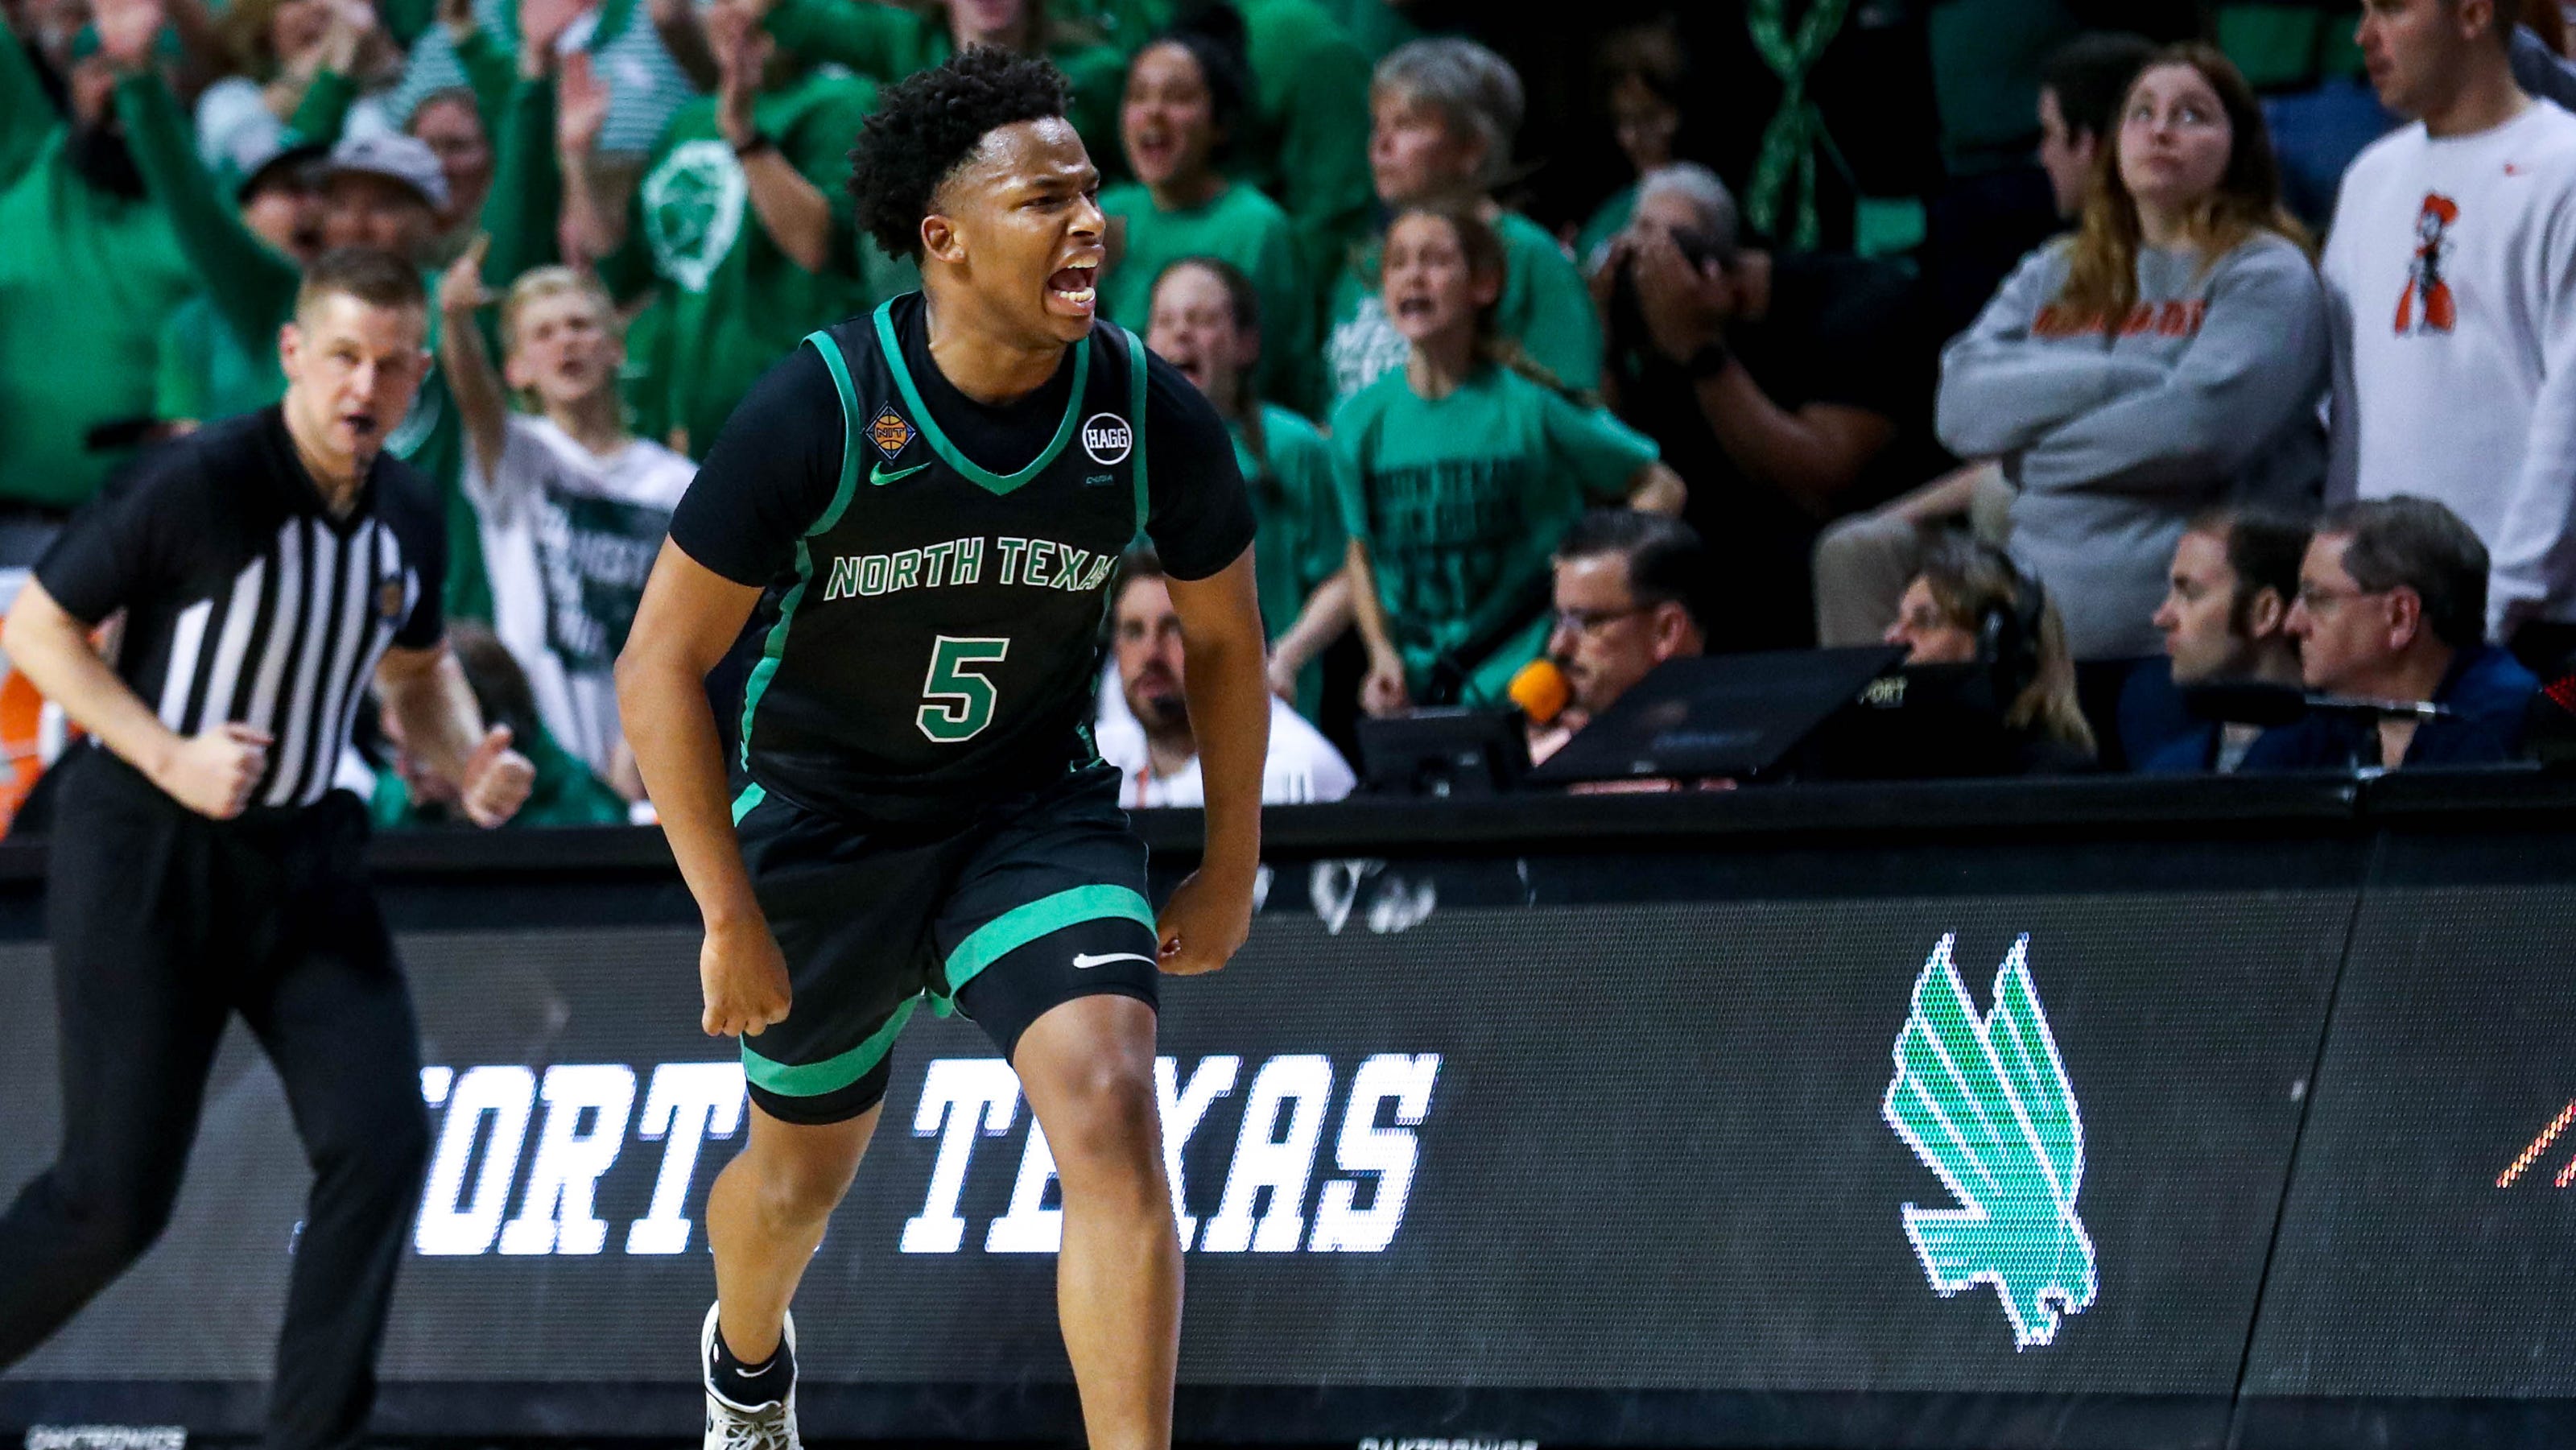 North Texas guard Tylor Perry (5) celebrates in overtime during a college basketball game in the quarterfinals of the National Invitational Tournament between the Oklahoma State Cowboys (OSU) and the North Texas Mean Green at Gallagher-Iba Arena in Stillwater, Okla., Tuesday, March 21, 2023. - Wisconsin Badgers